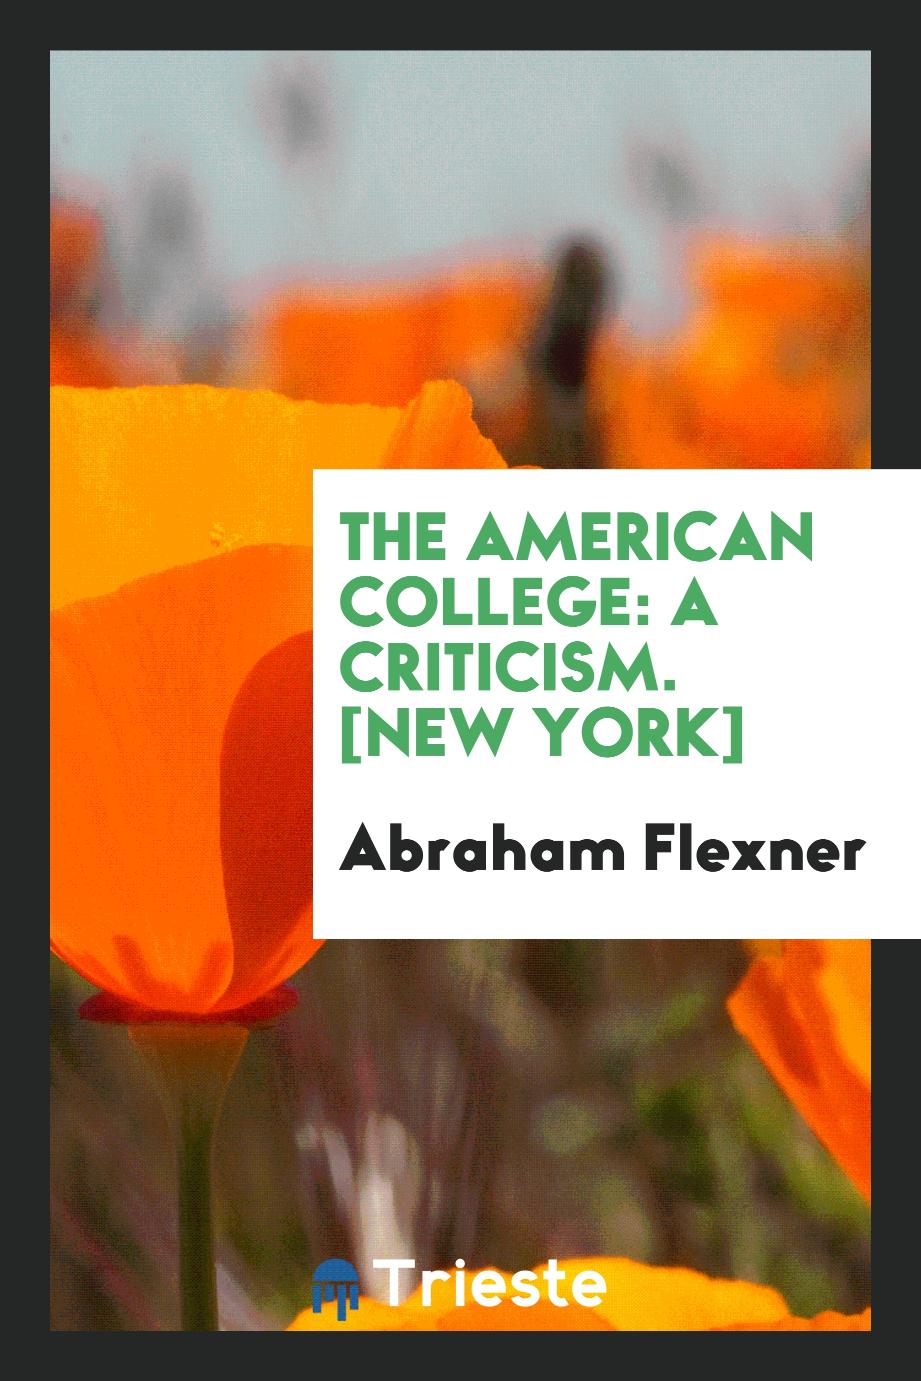 The American College: A Criticism. [New York]